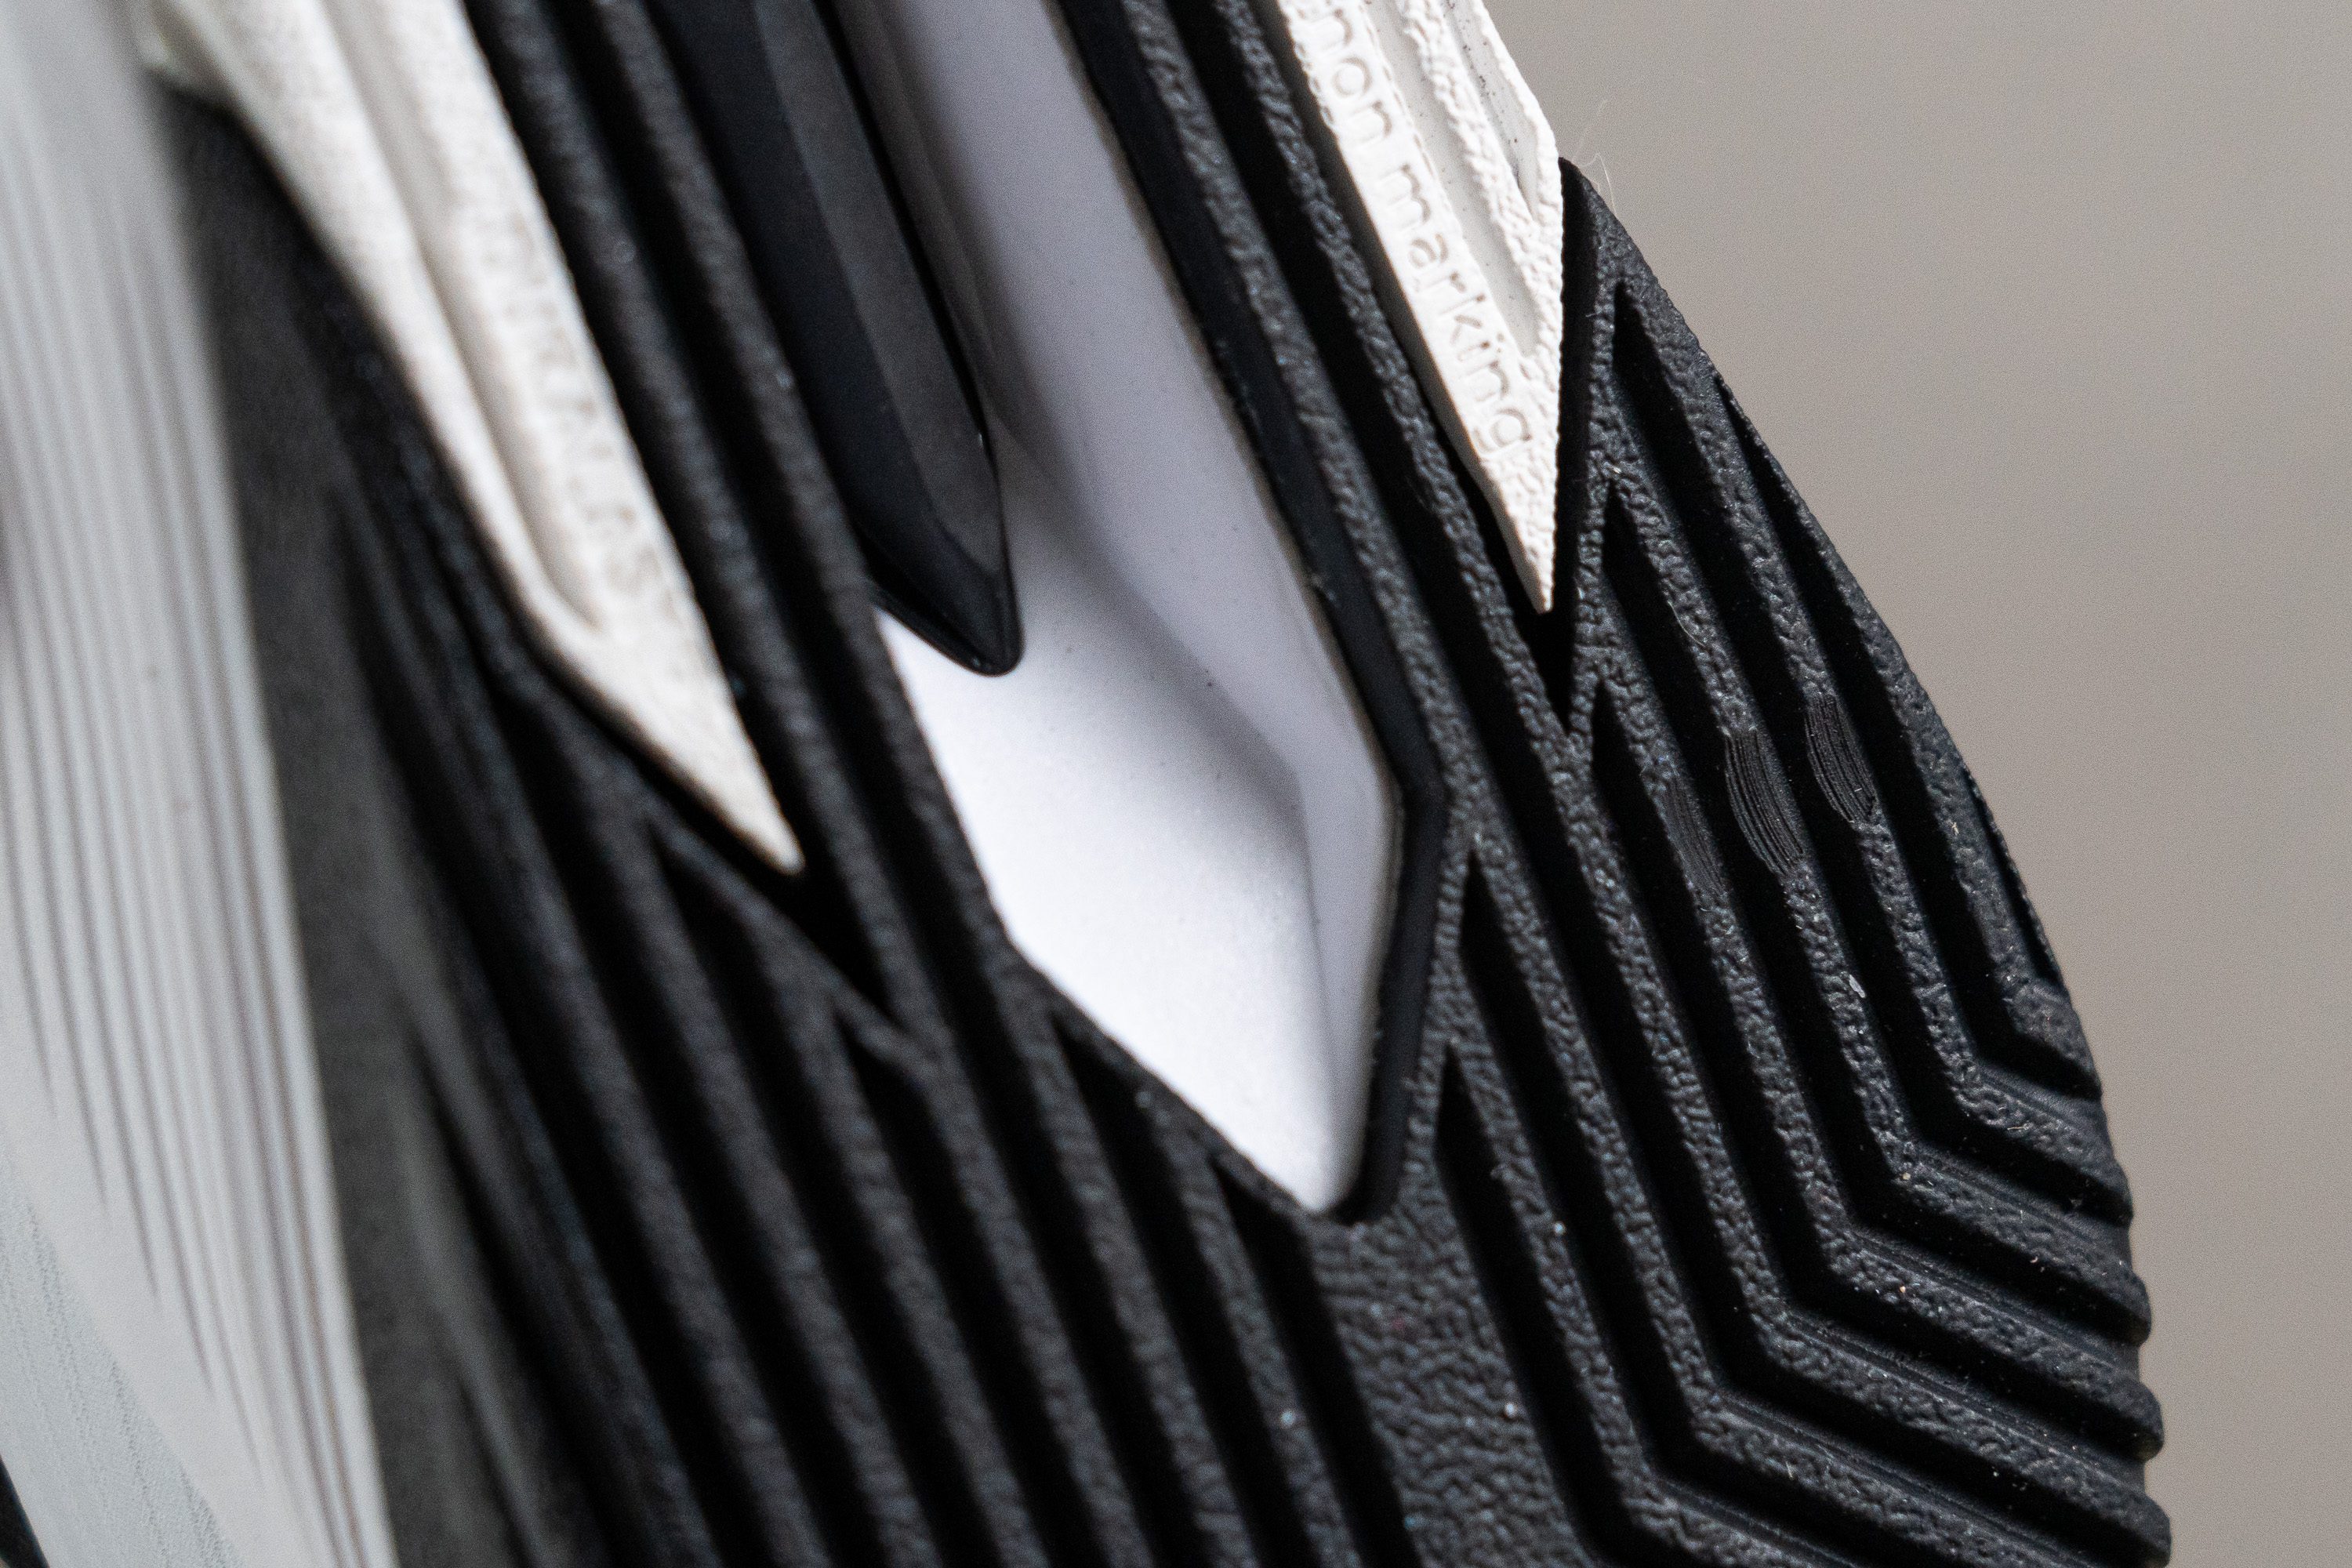 We applaud Wilsons precision when it comes to the heel-to-toe drop Outsole durability test